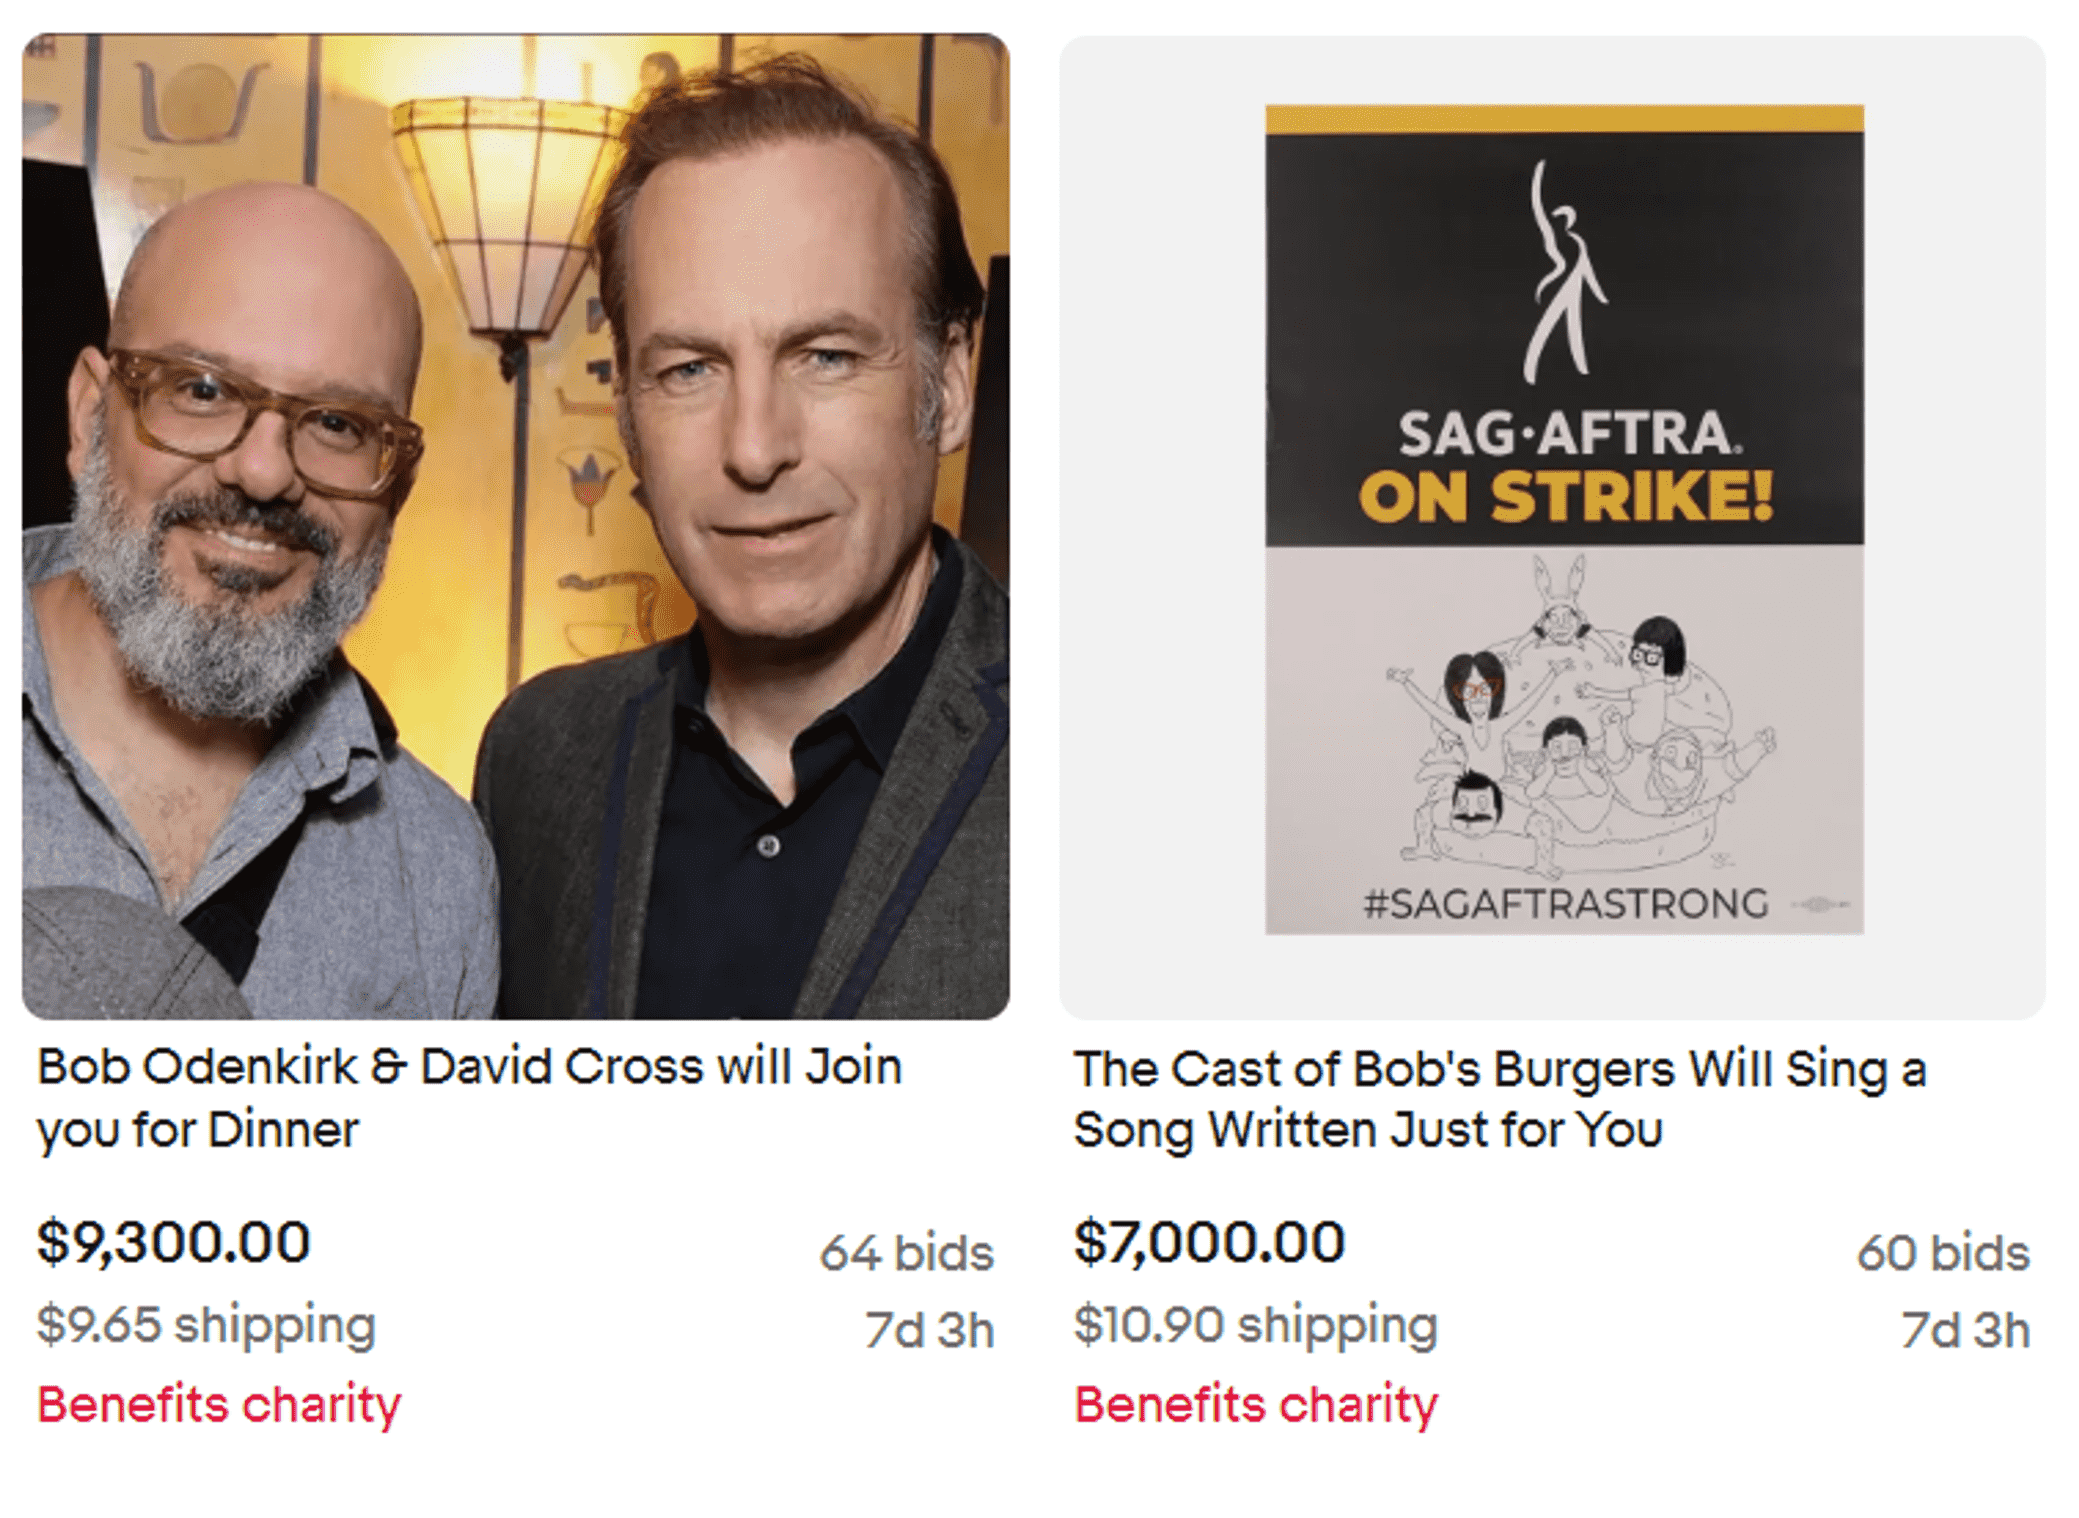 The Union Solidarity Coalition is auctioning off unique celebrity experiences on eBay to support production crews affected by the WGA/SAG-AFTRA strike.